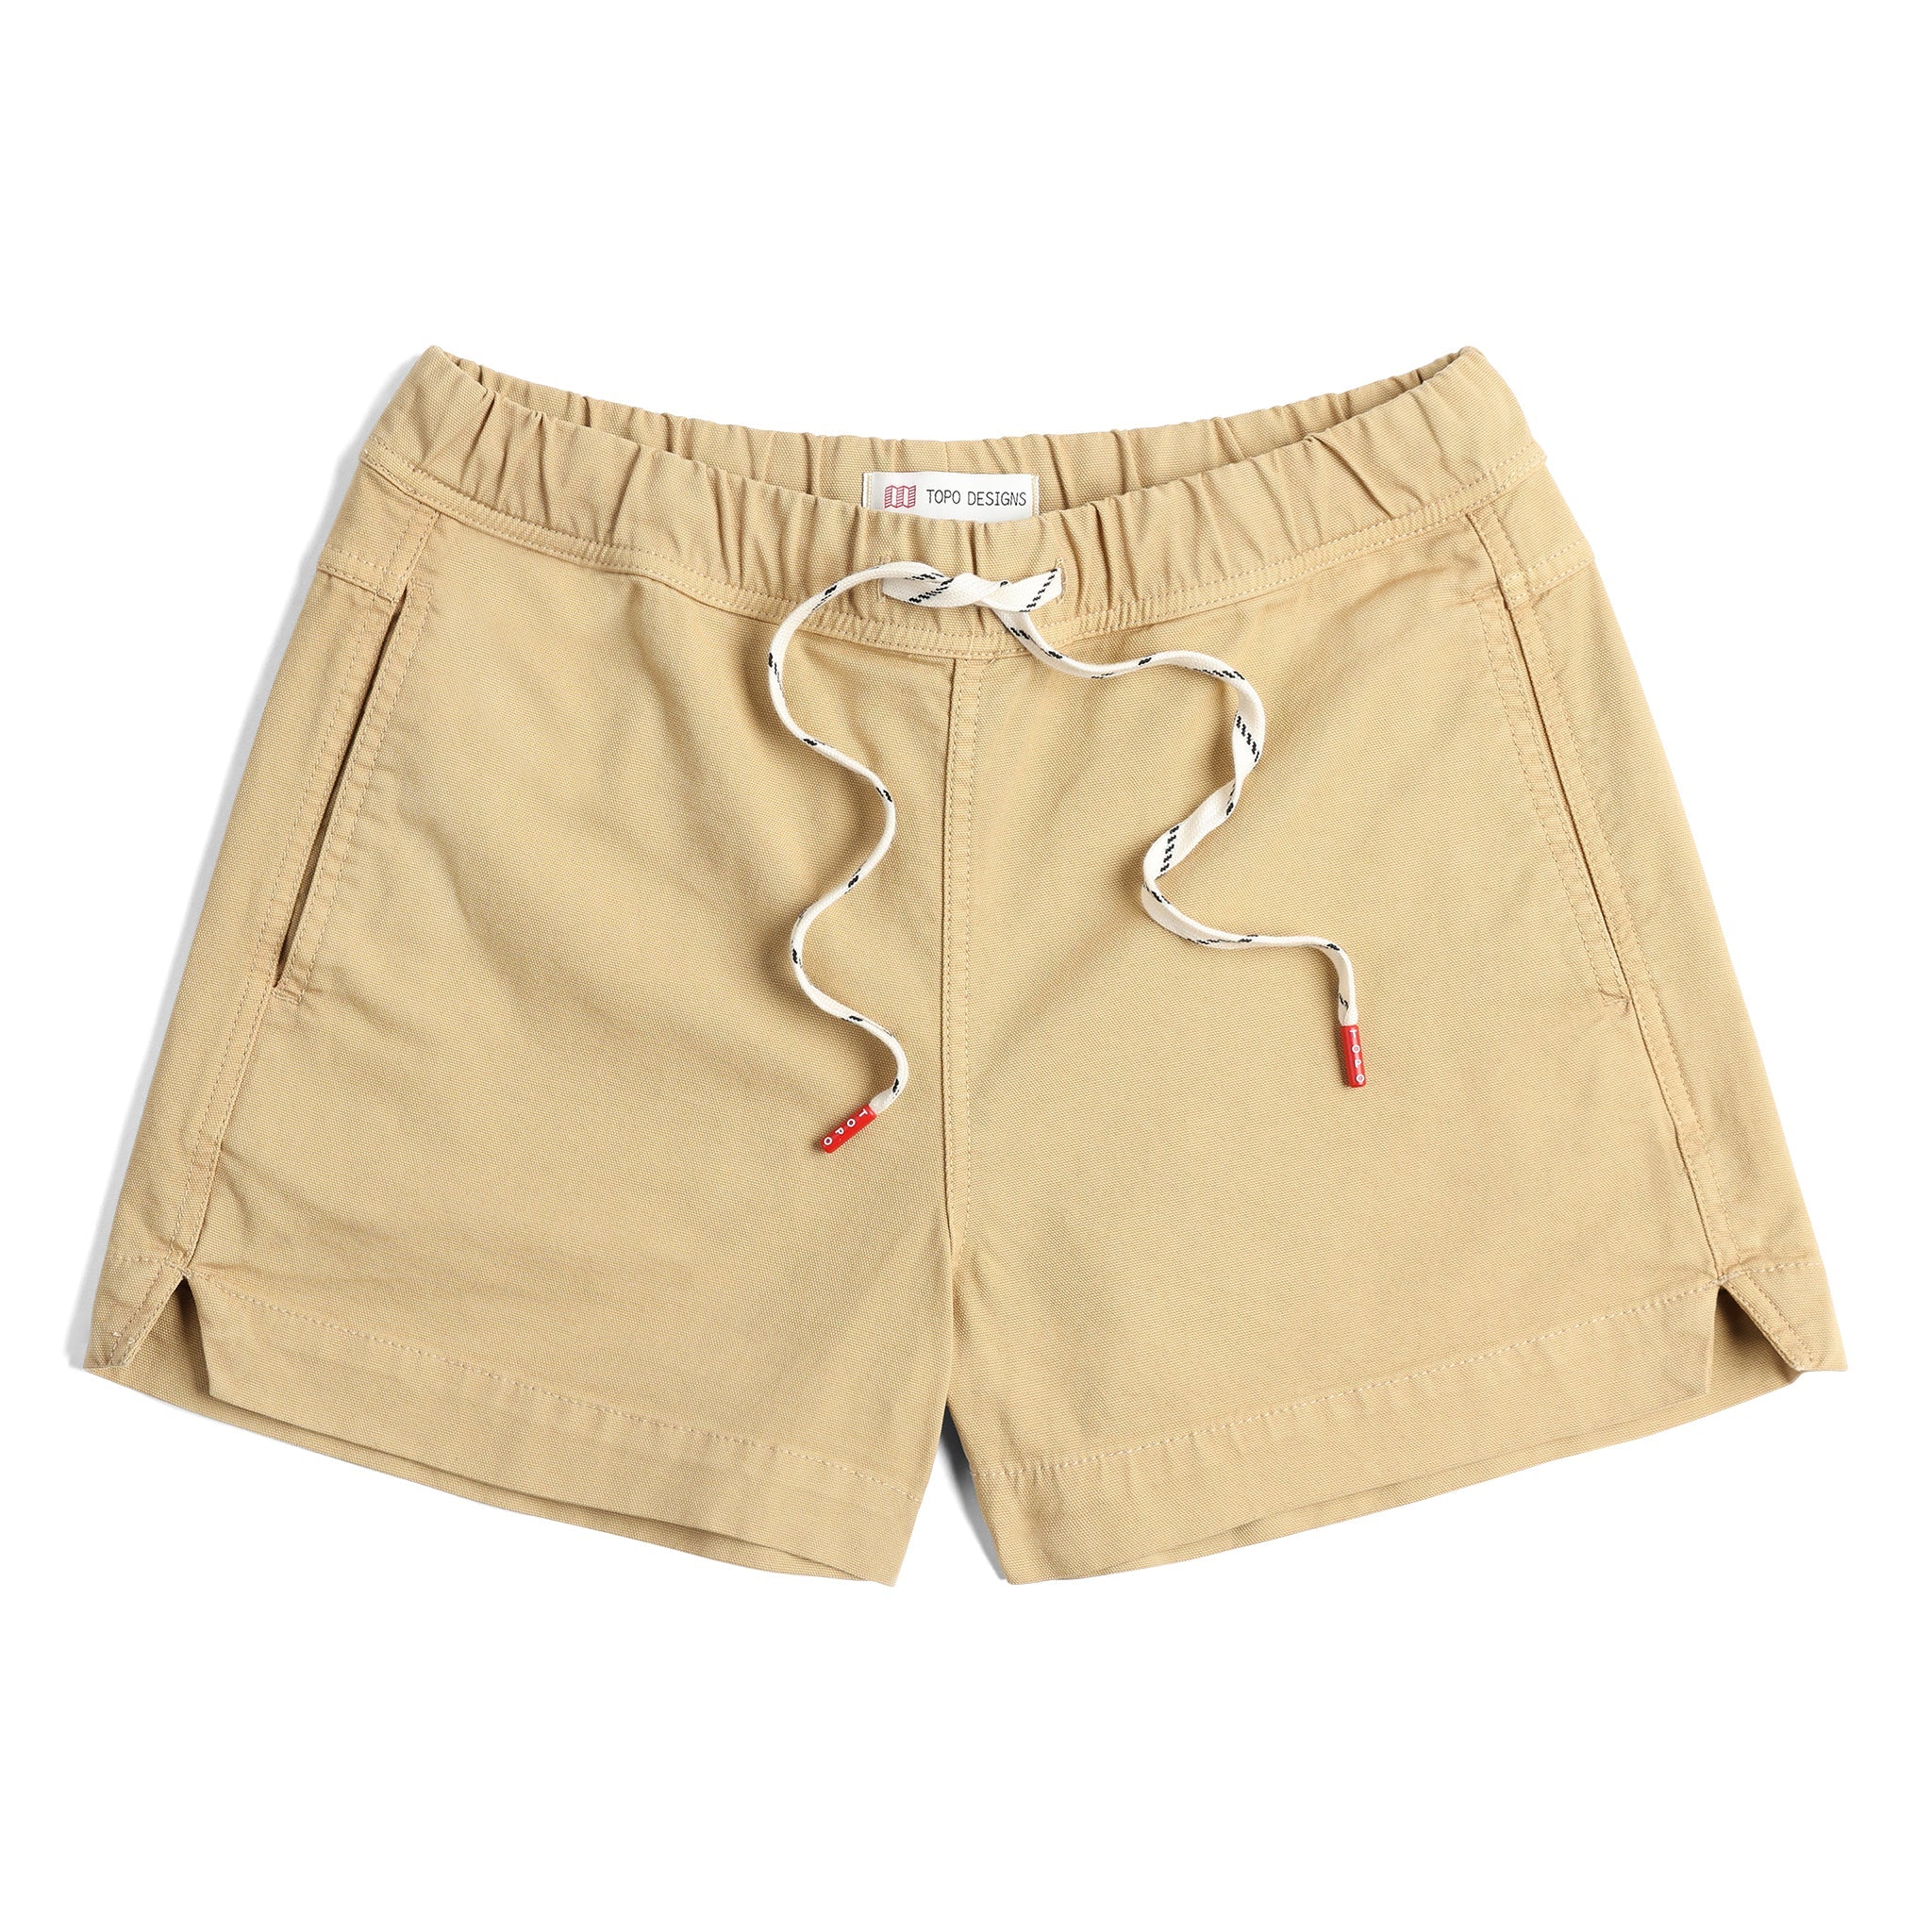 Front View of Topo Designs Dirt Shorts - Women's in "Sahara"